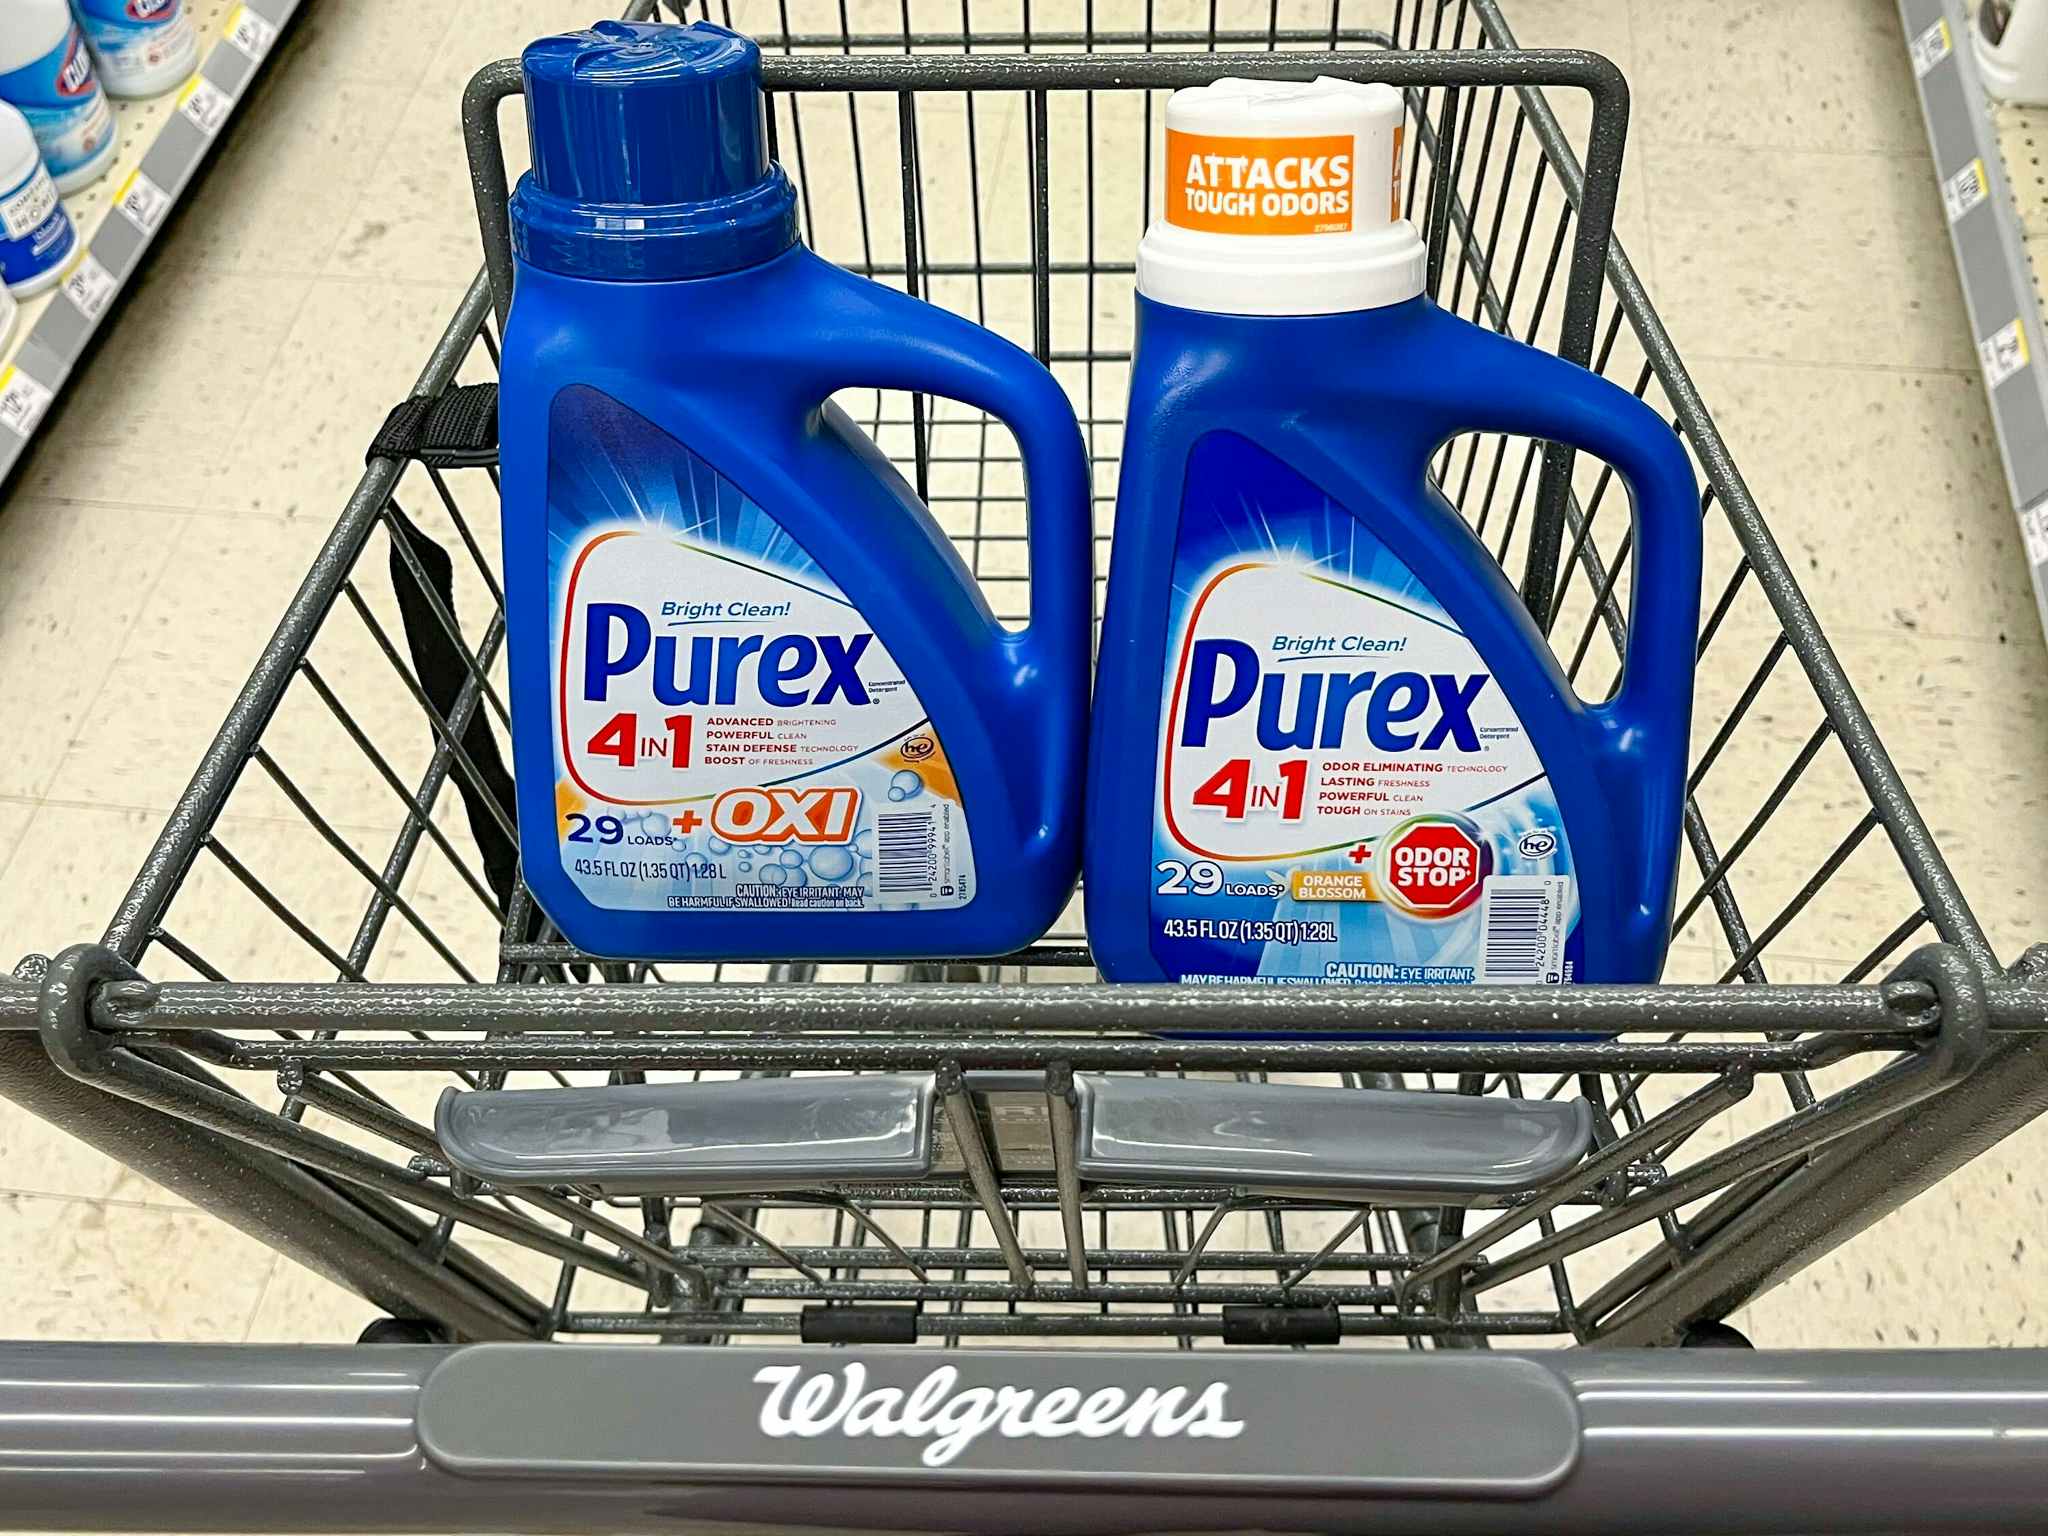 two bottle of purex detergent inside of shopping cart